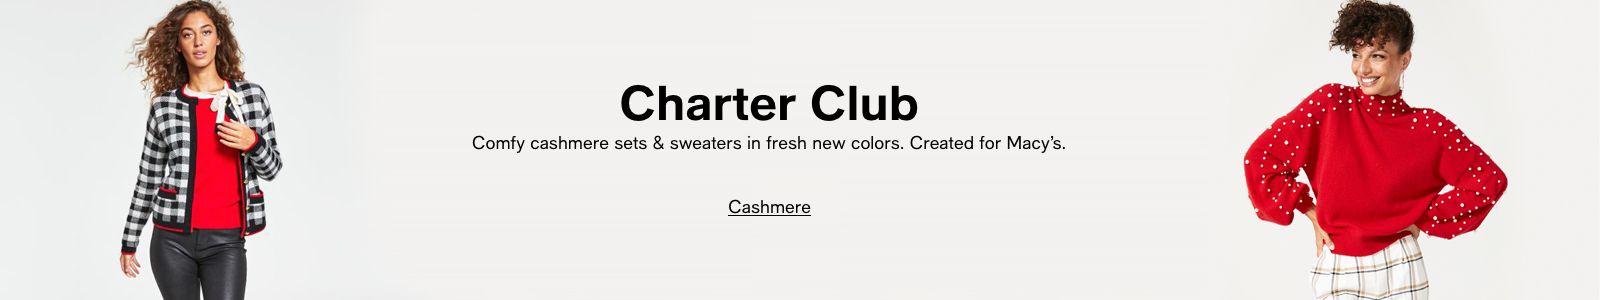 Charter Club, Comfy cashmere sets and sweaters in fresh new colors, Created for Macy's, Cashmere